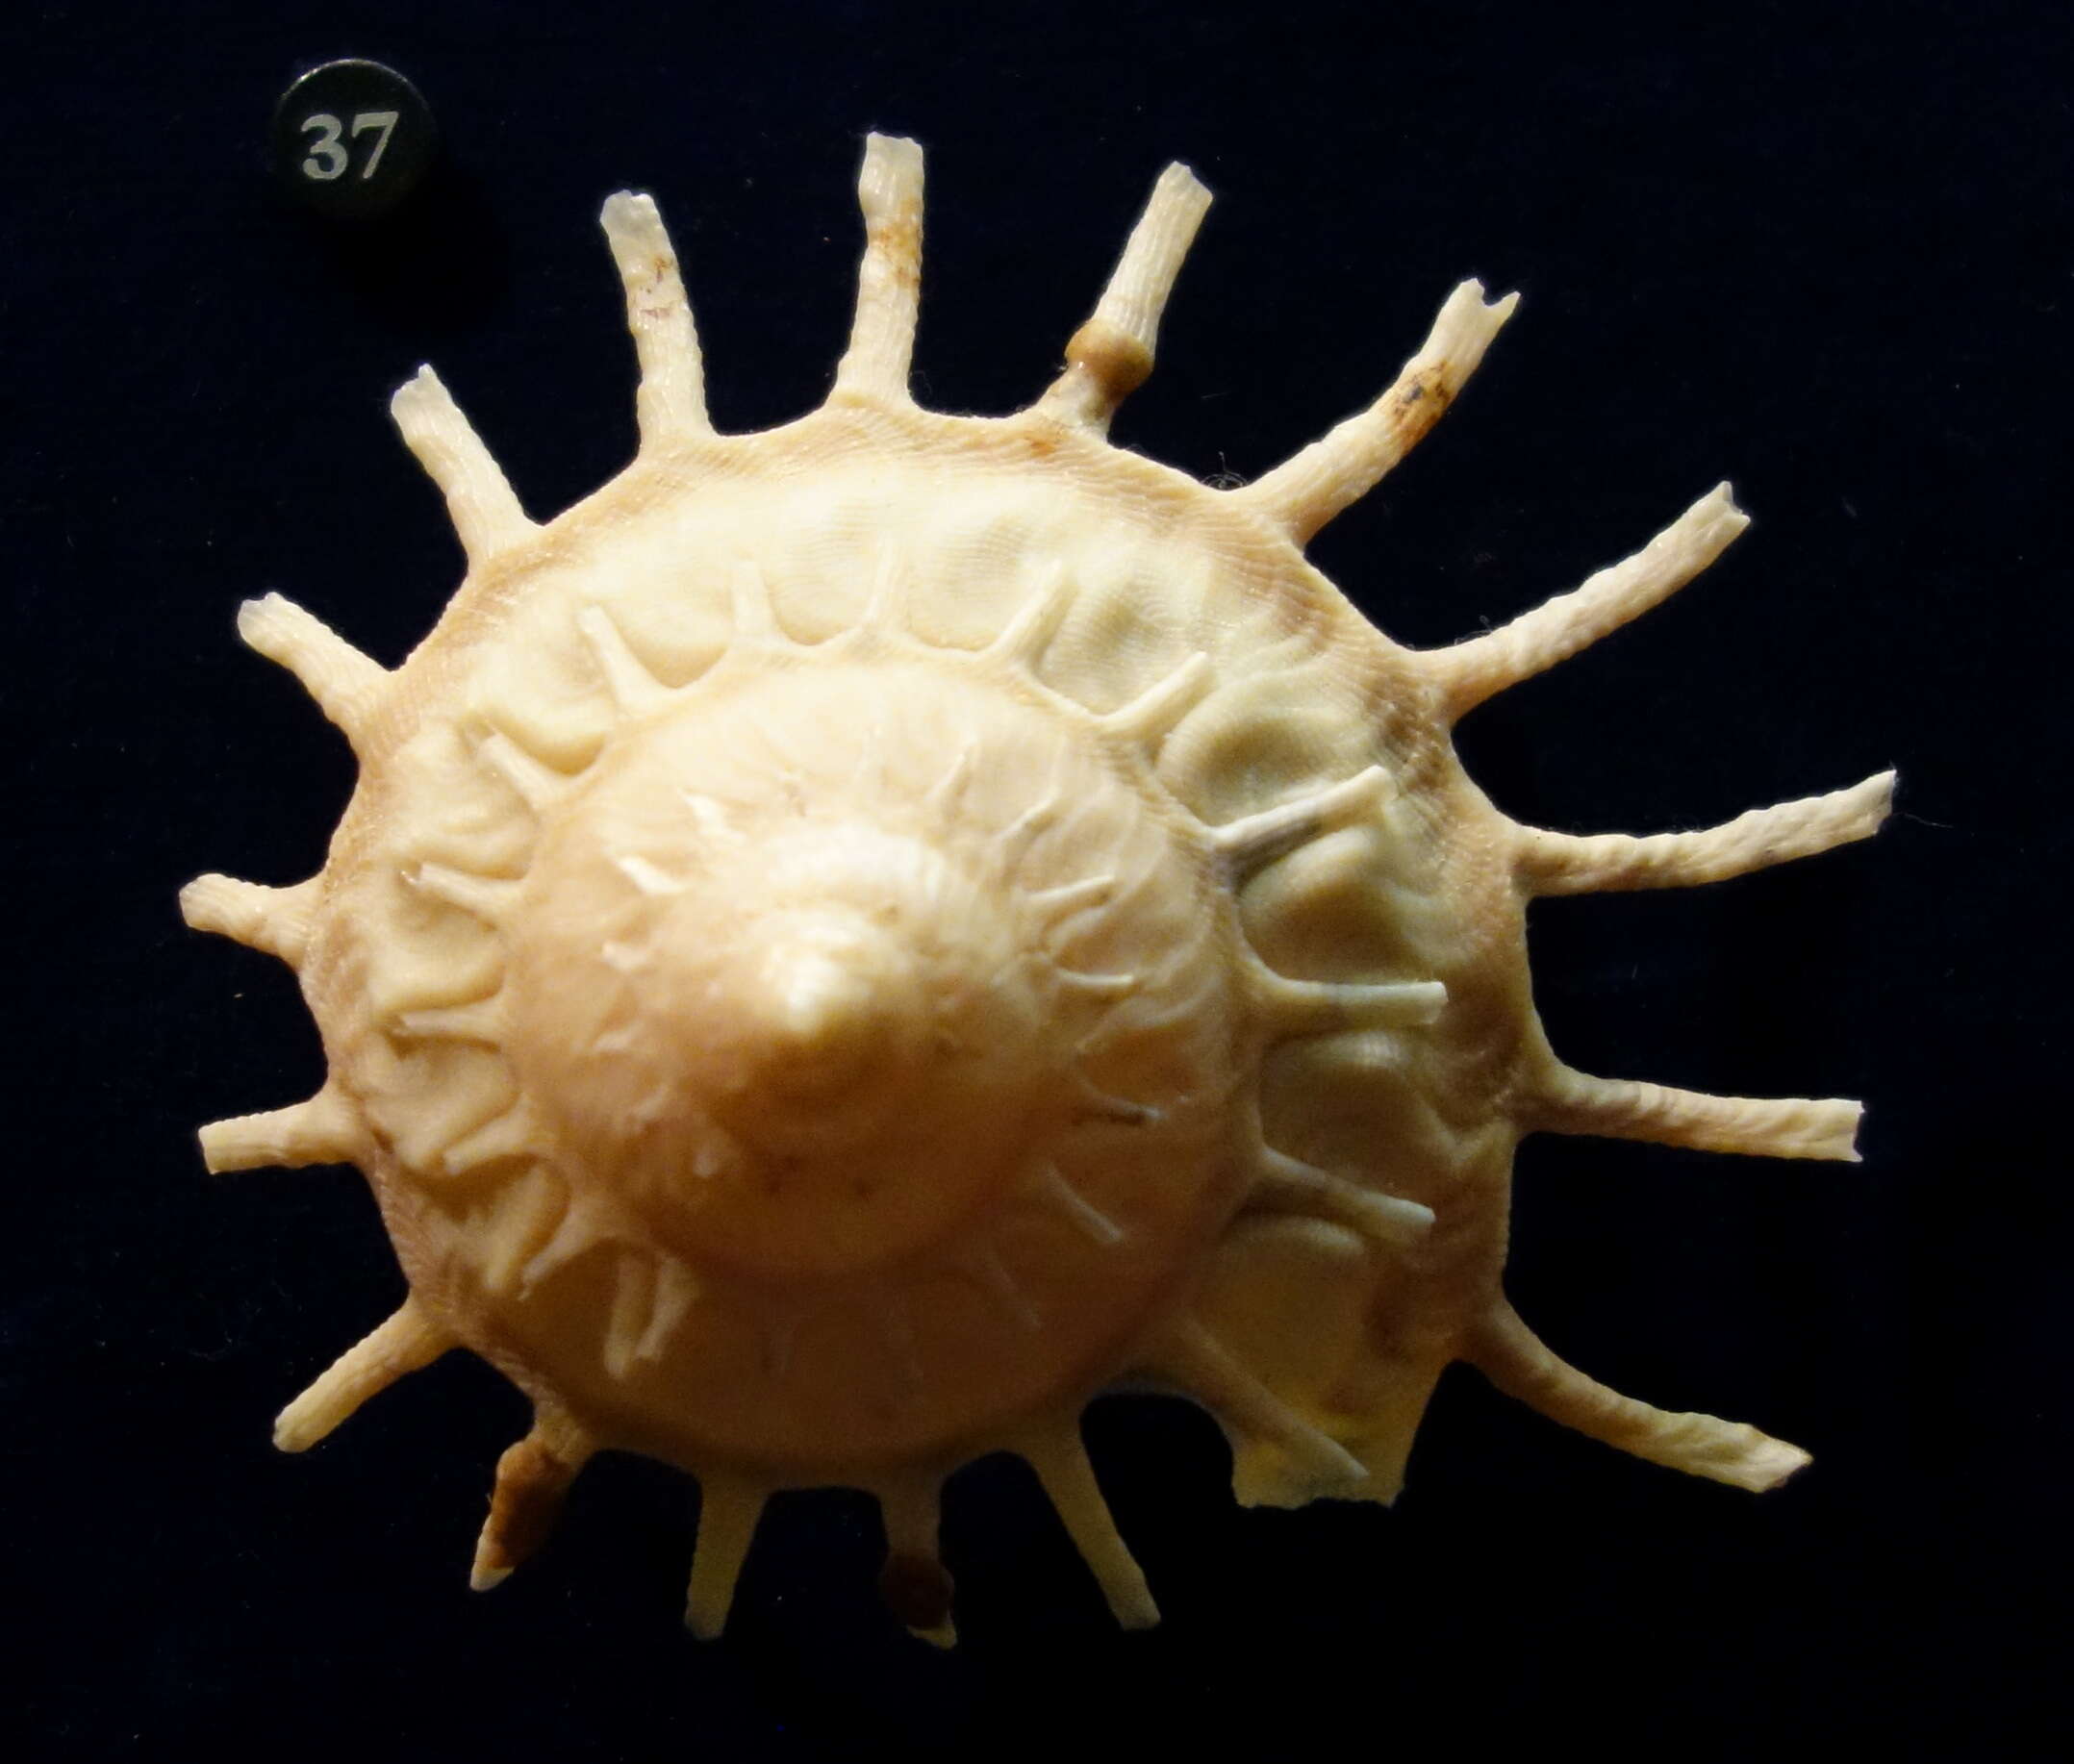 Image of sun carrier shell